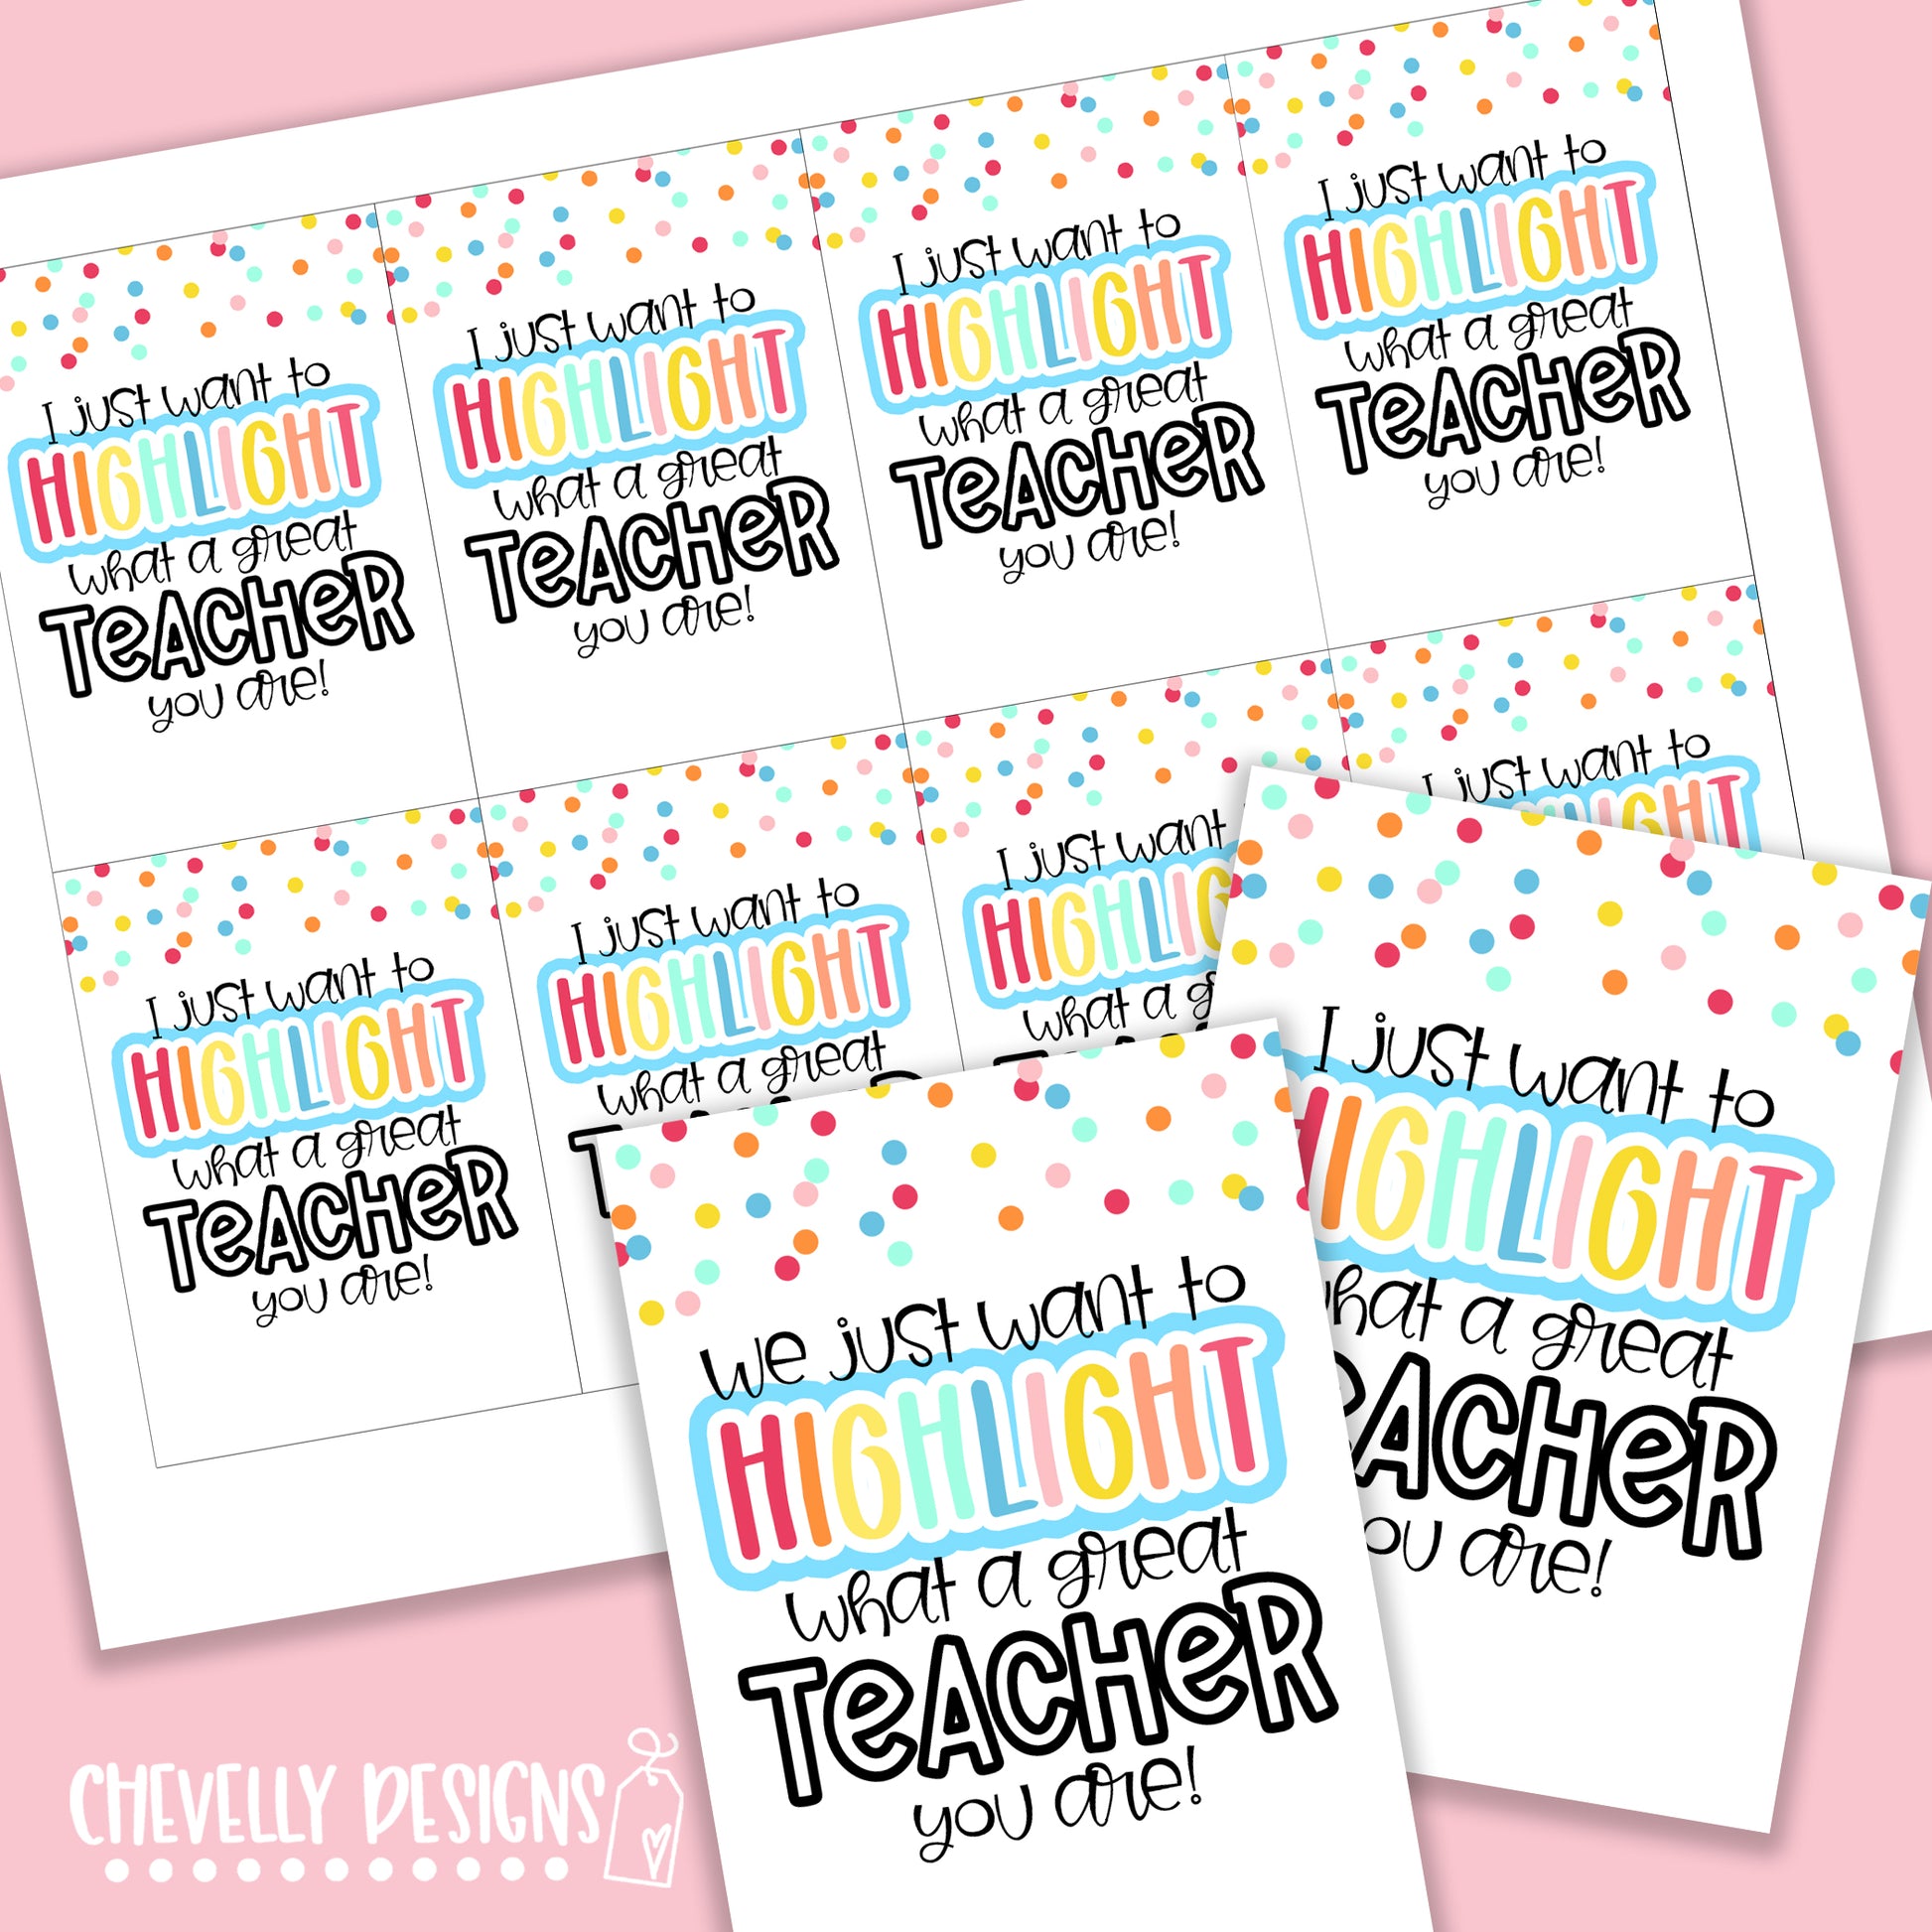 Teacher Christmas gift- markers with free printable card